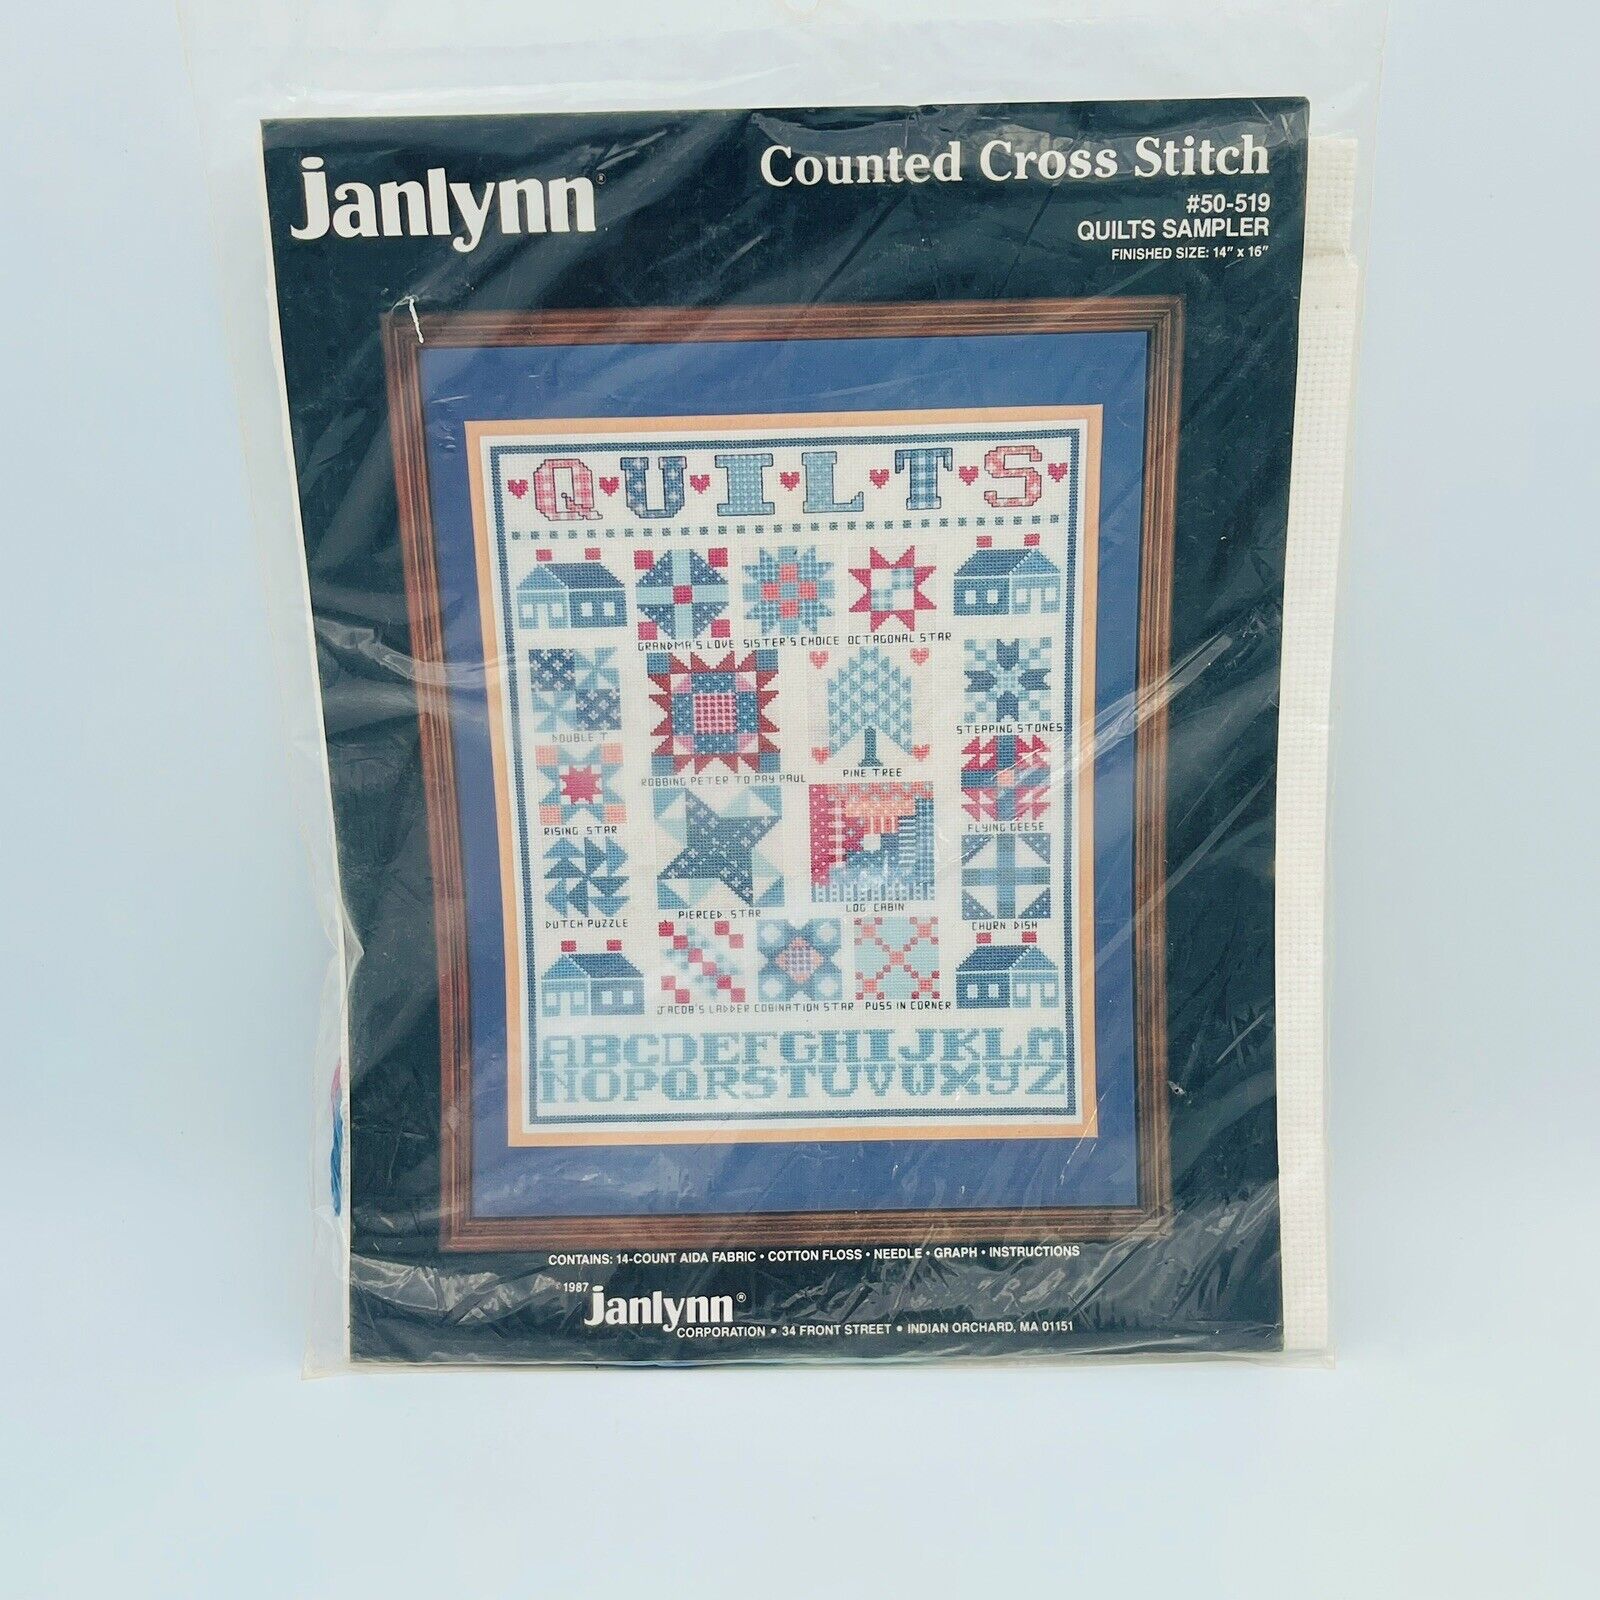 Vintage Janlynn Counted Cross Stitch 50-519 Quilts Sampler Kit 1987 USA